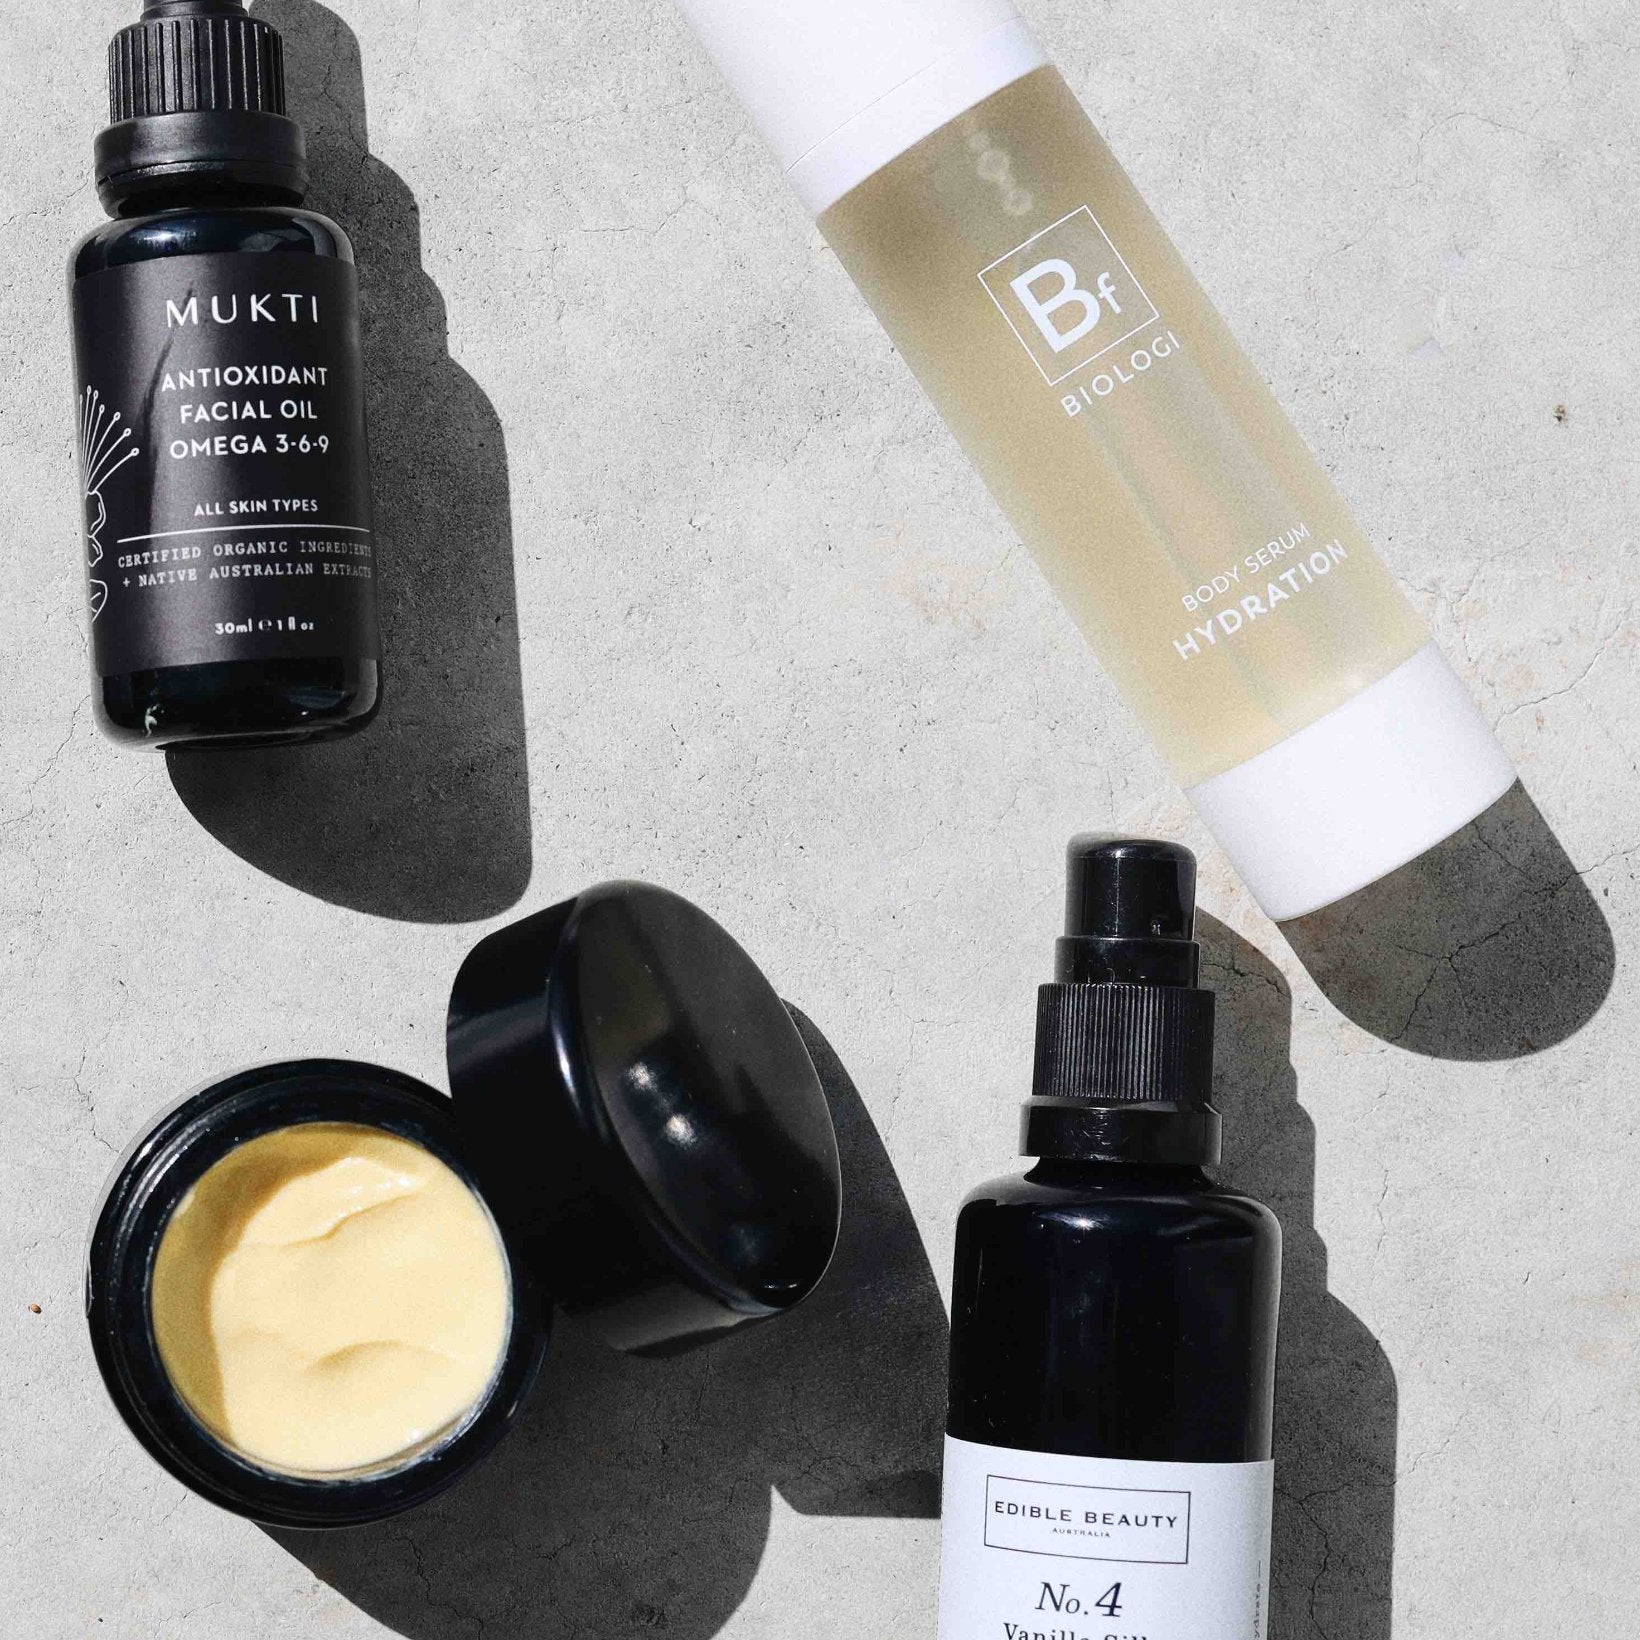 PREP YOUR SKIN FOR SPRING WITH THESE 5 PRODUCTS